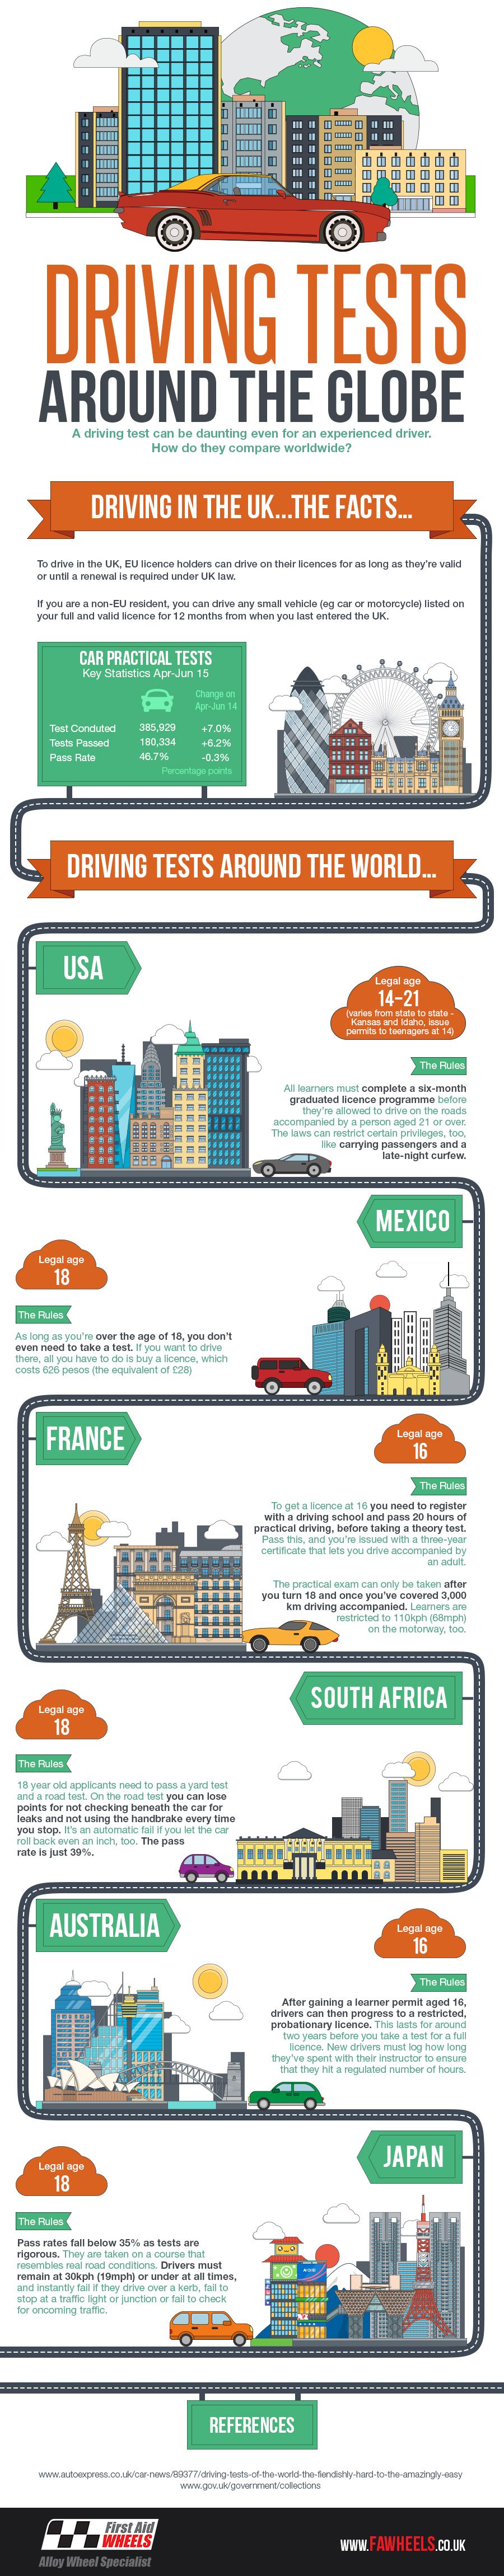 Driving-Tests-Around-The-World-Infographic